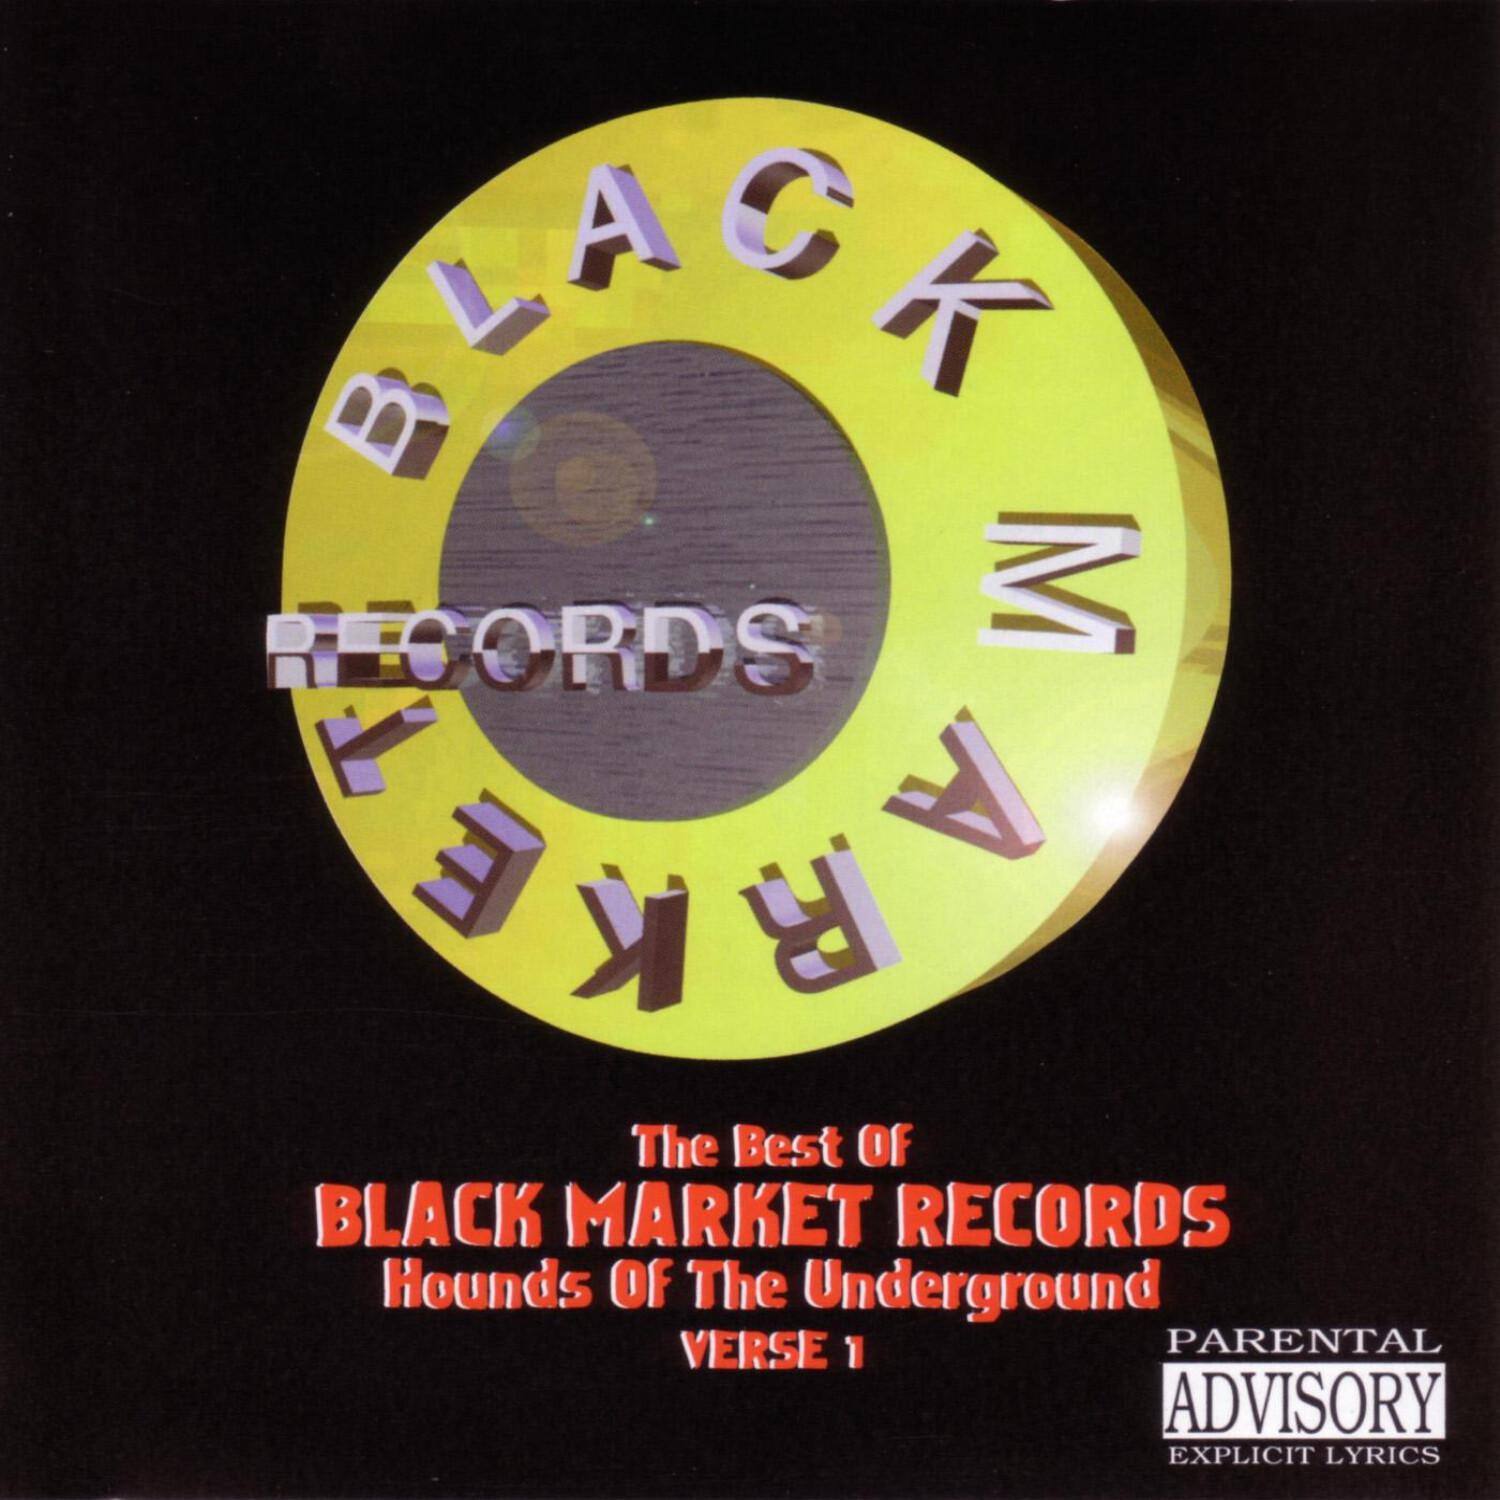 The Best of Black Market Records, Verse 1 (Hounds of The Underground)